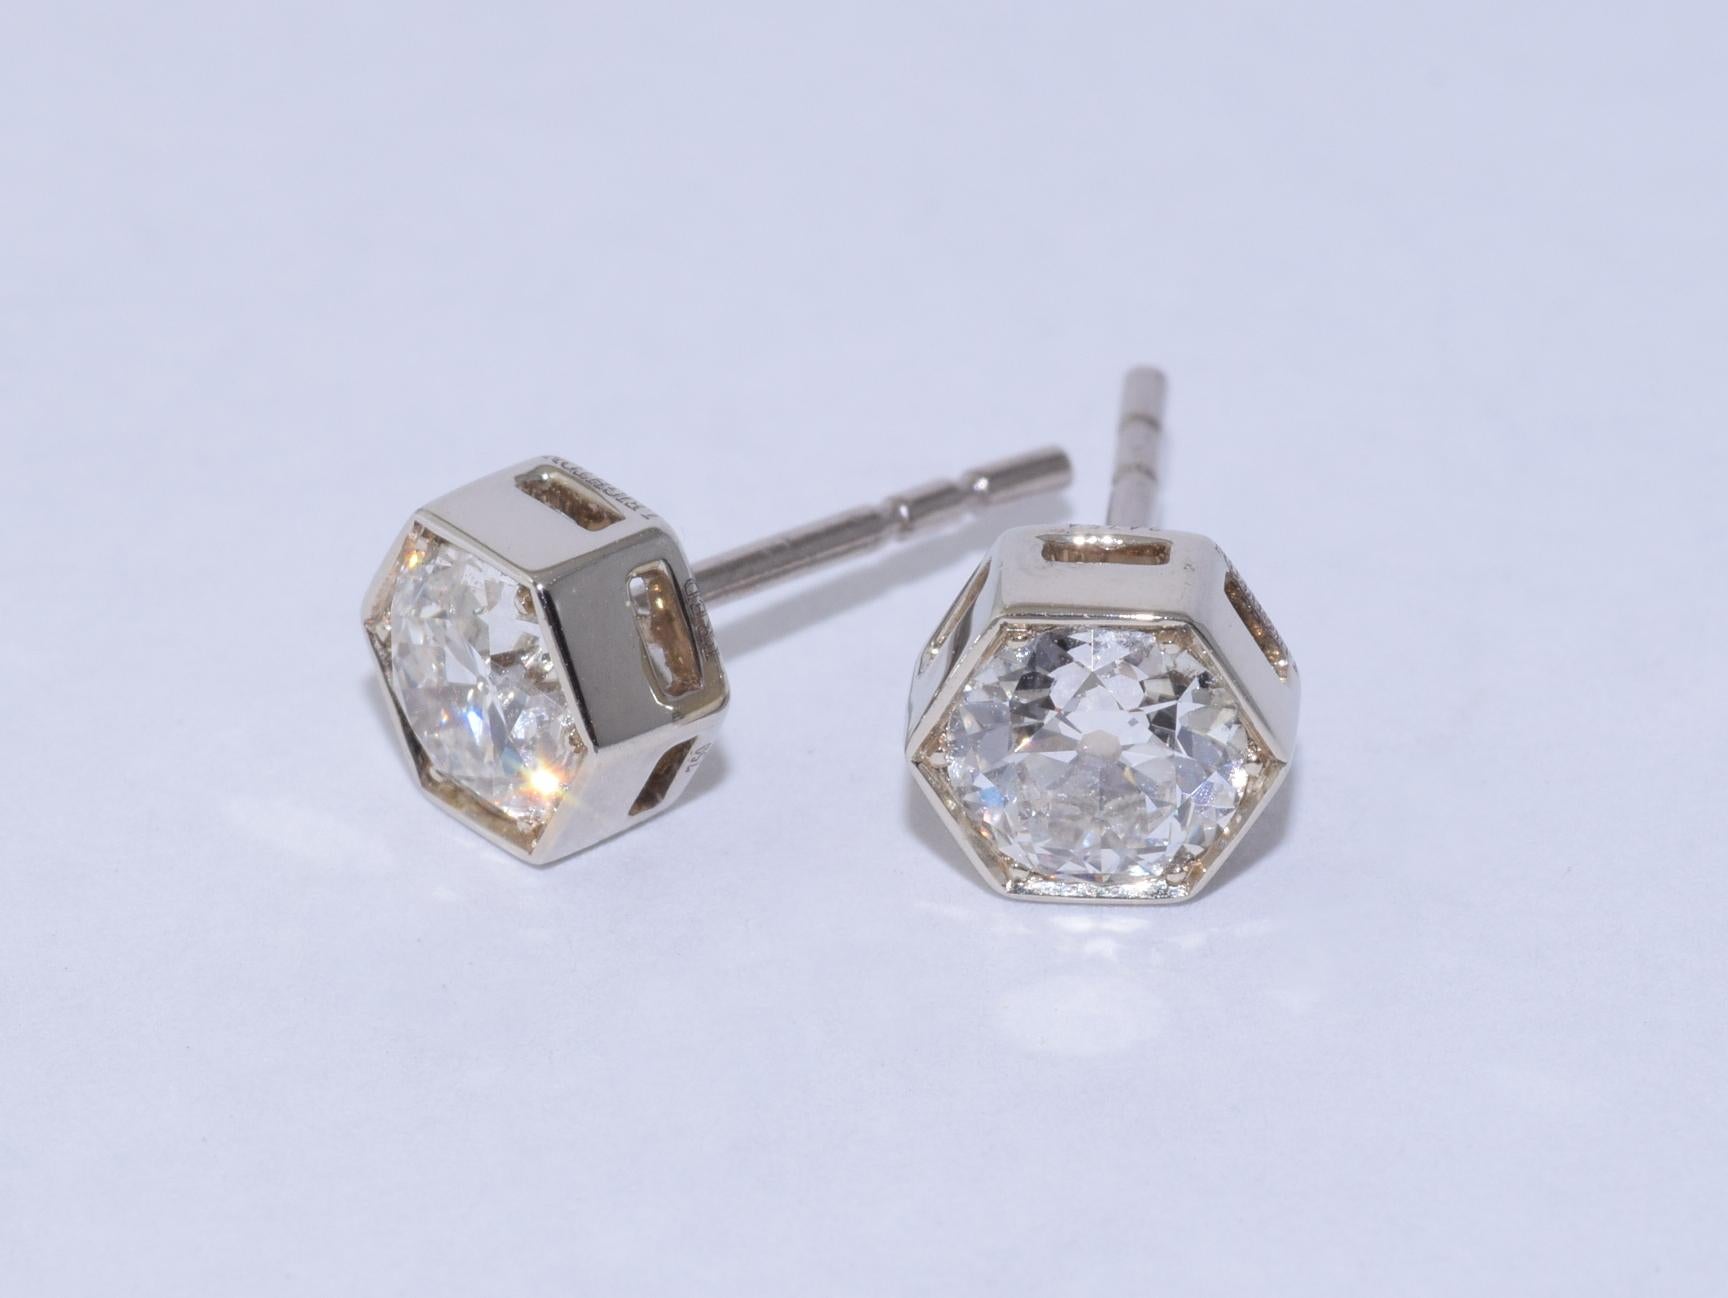 Stud earrings are set with two old European diamonds totaling 1.02 carats, of approximately FG/SI quality, mounted in 18K white gold hexagonal frame, signed Fred Leighton. The earrings measure approximately 5.8 x 6.5mm (approximately 0.25